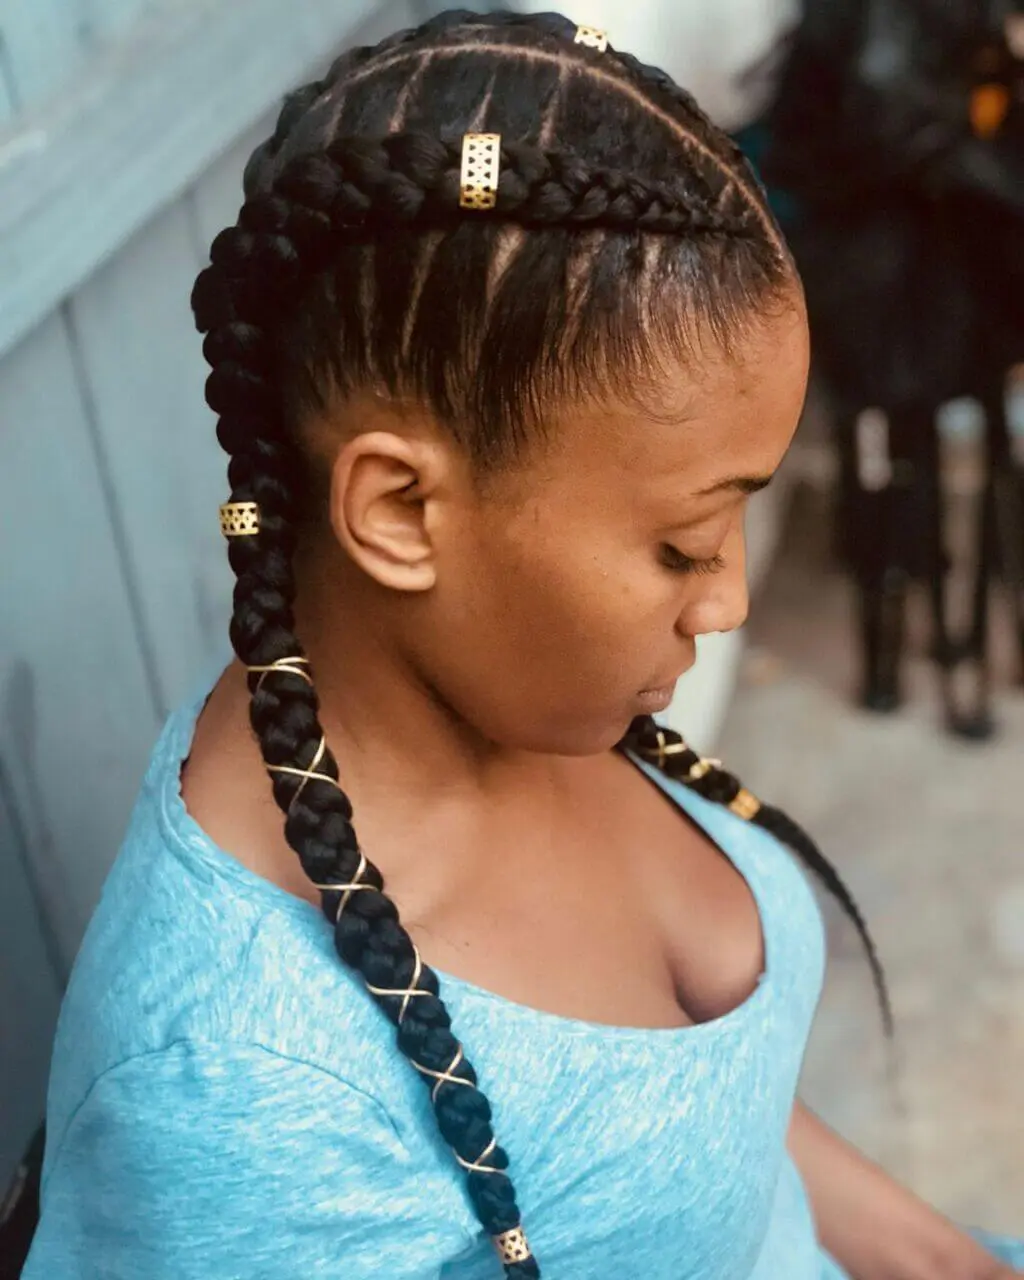 A woman with braids and a blue shirt
